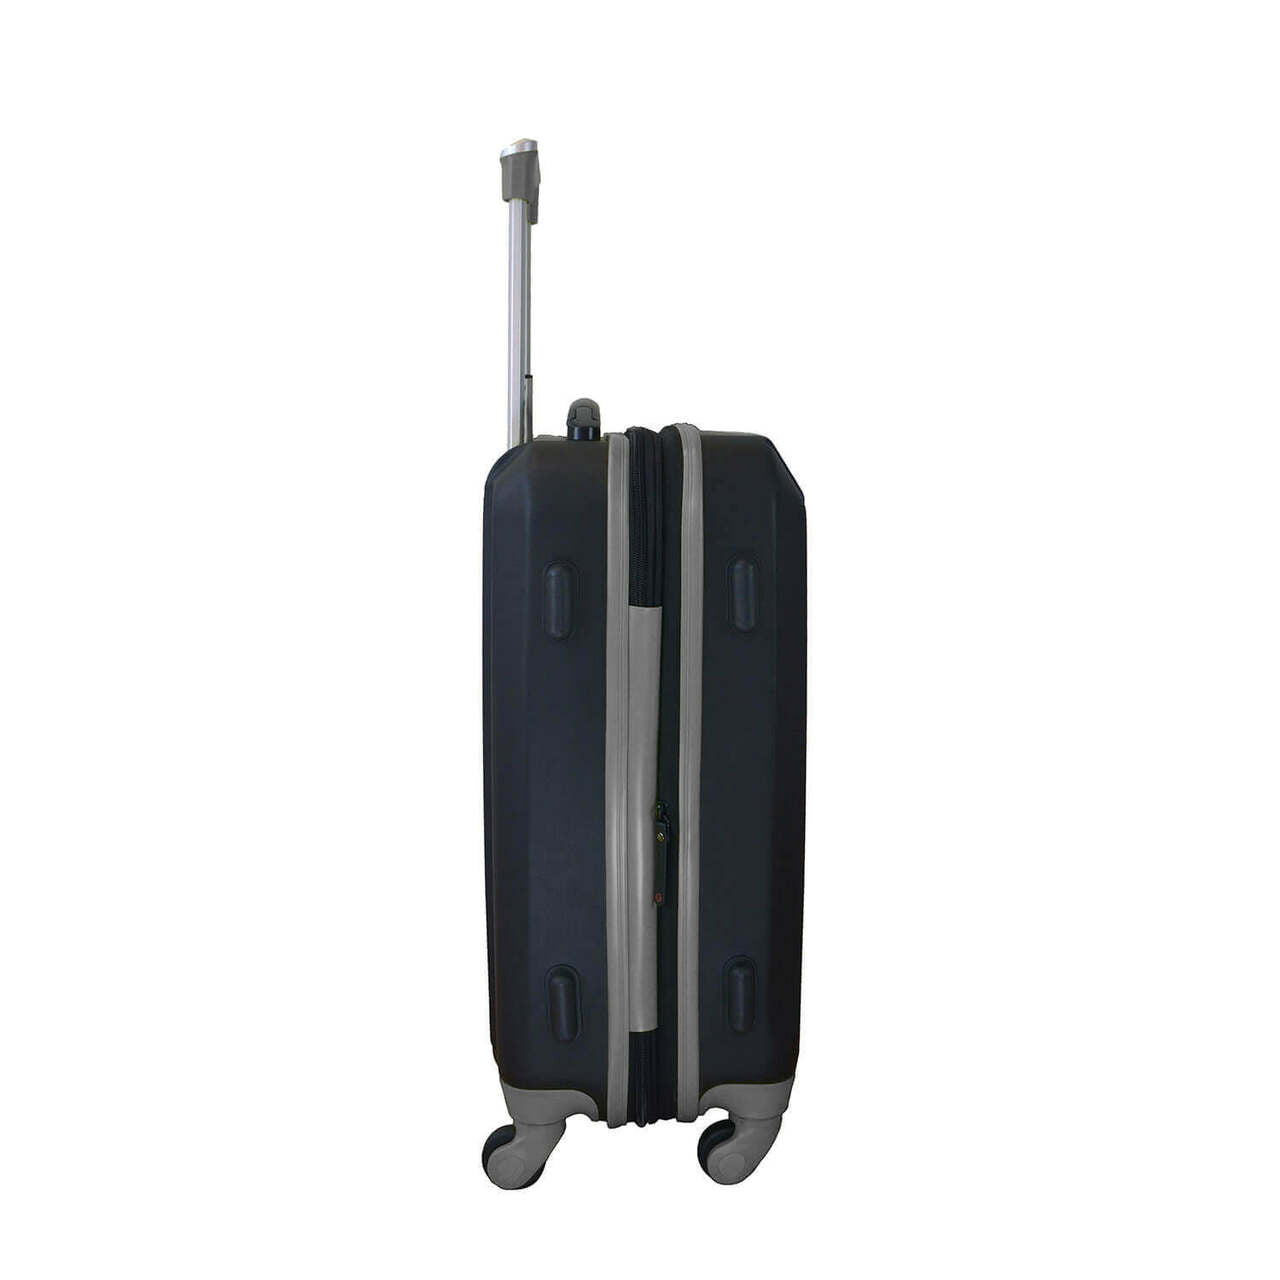 Knicks Carry On Spinner Luggage | New York Knicks Hardcase Two-Tone Luggage Carry-on Spinner in Gray